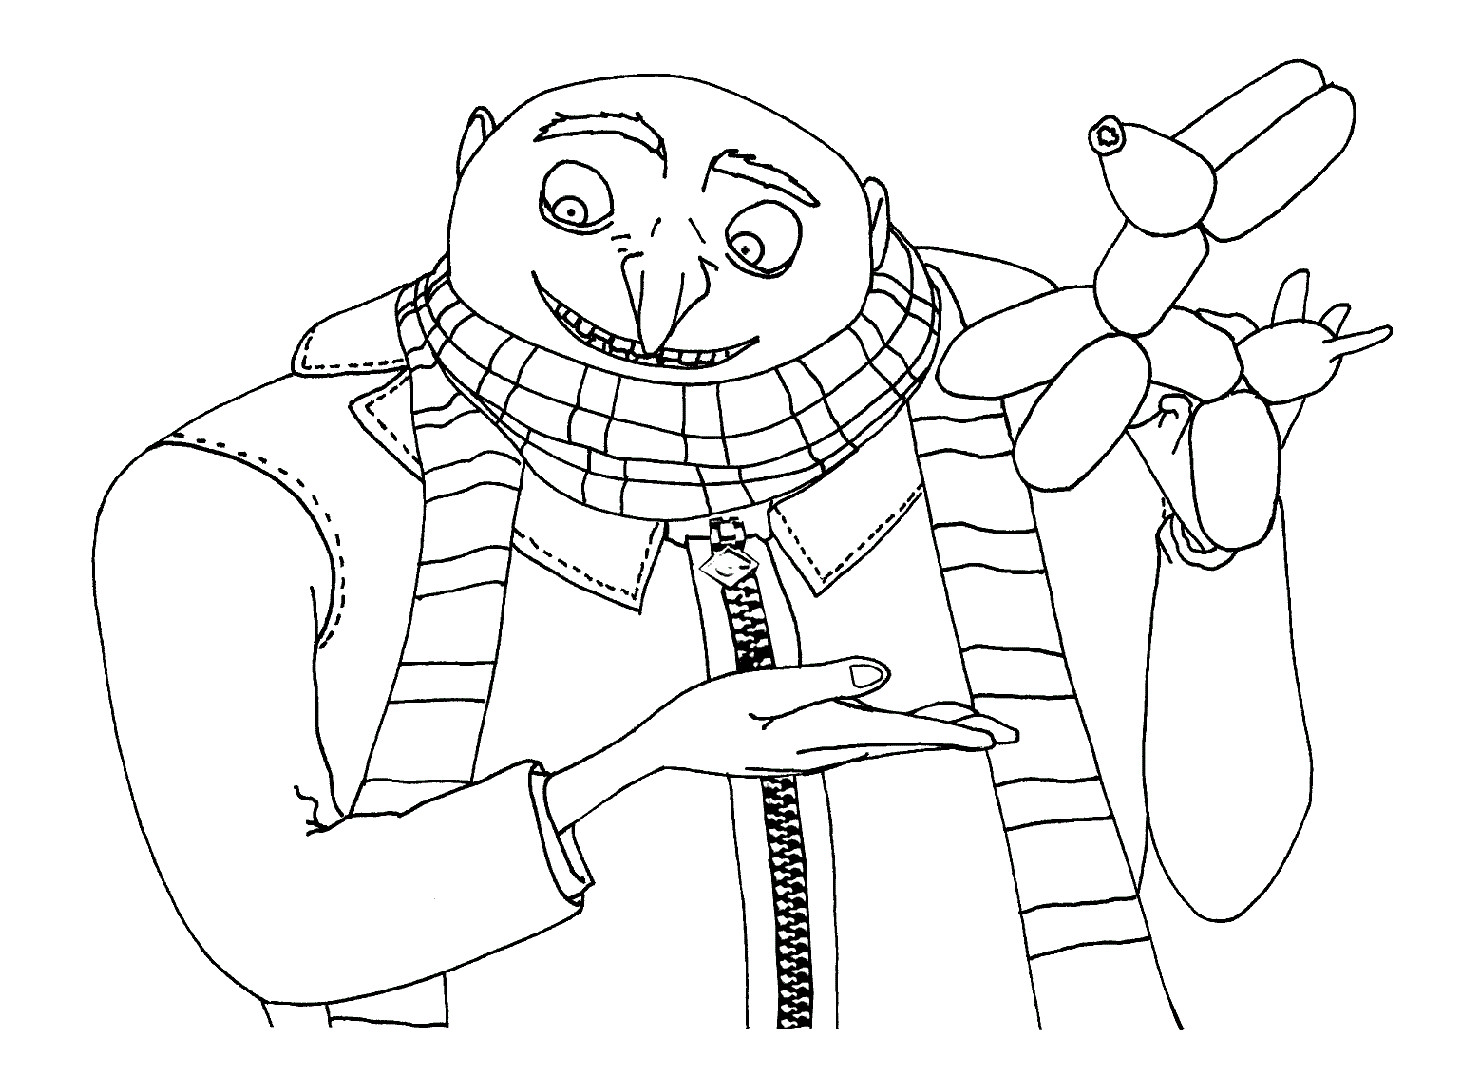 Despicable Me Coloring Pages
 To print minion coloring pages from “Despicable Me” for free